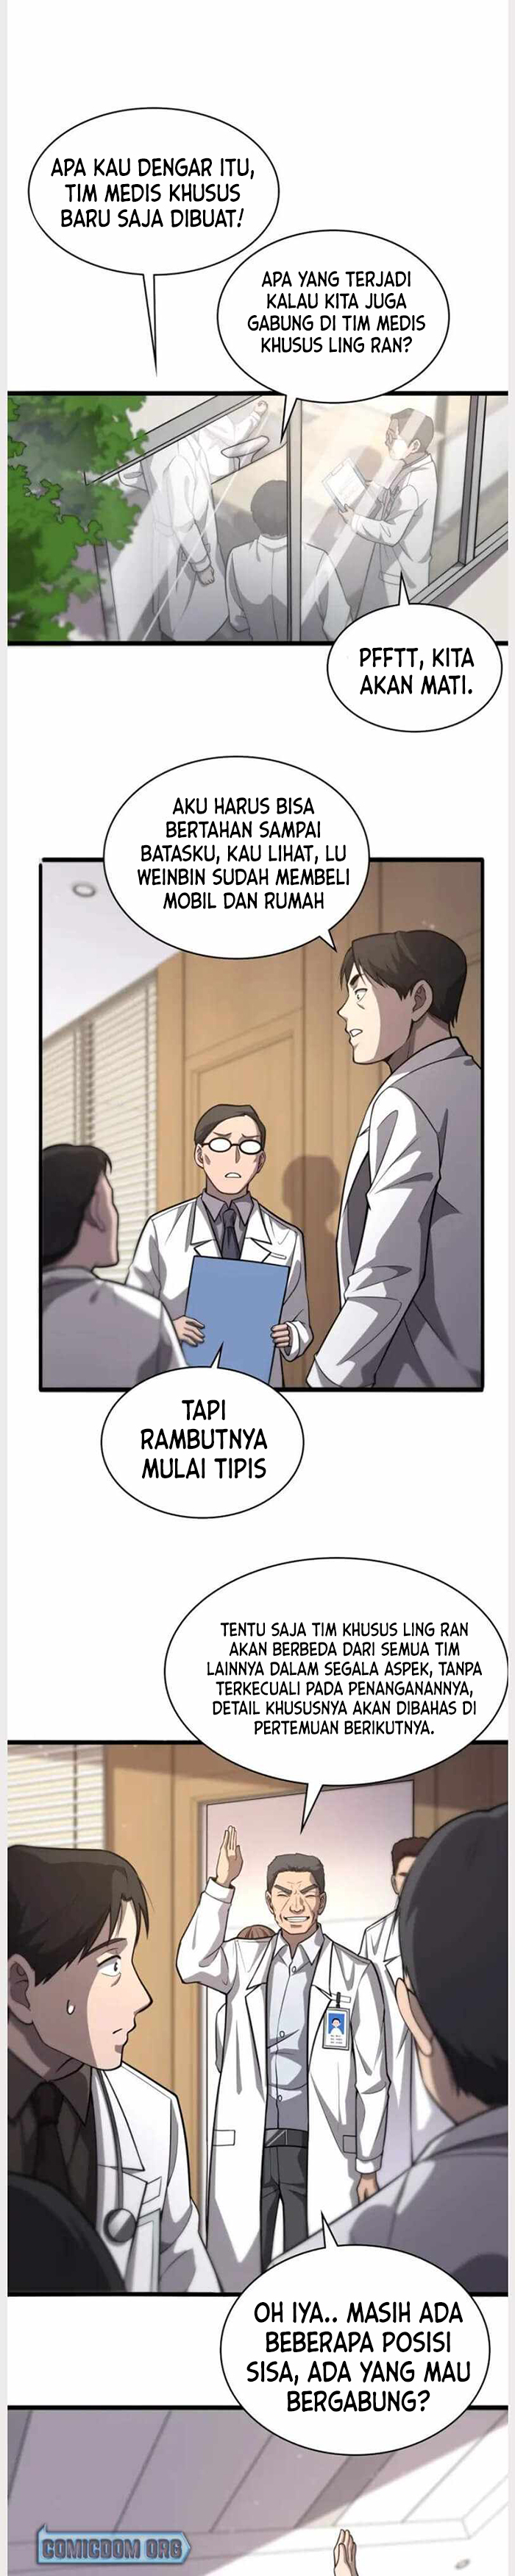 Great Doctor Ling Ran Chapter 117